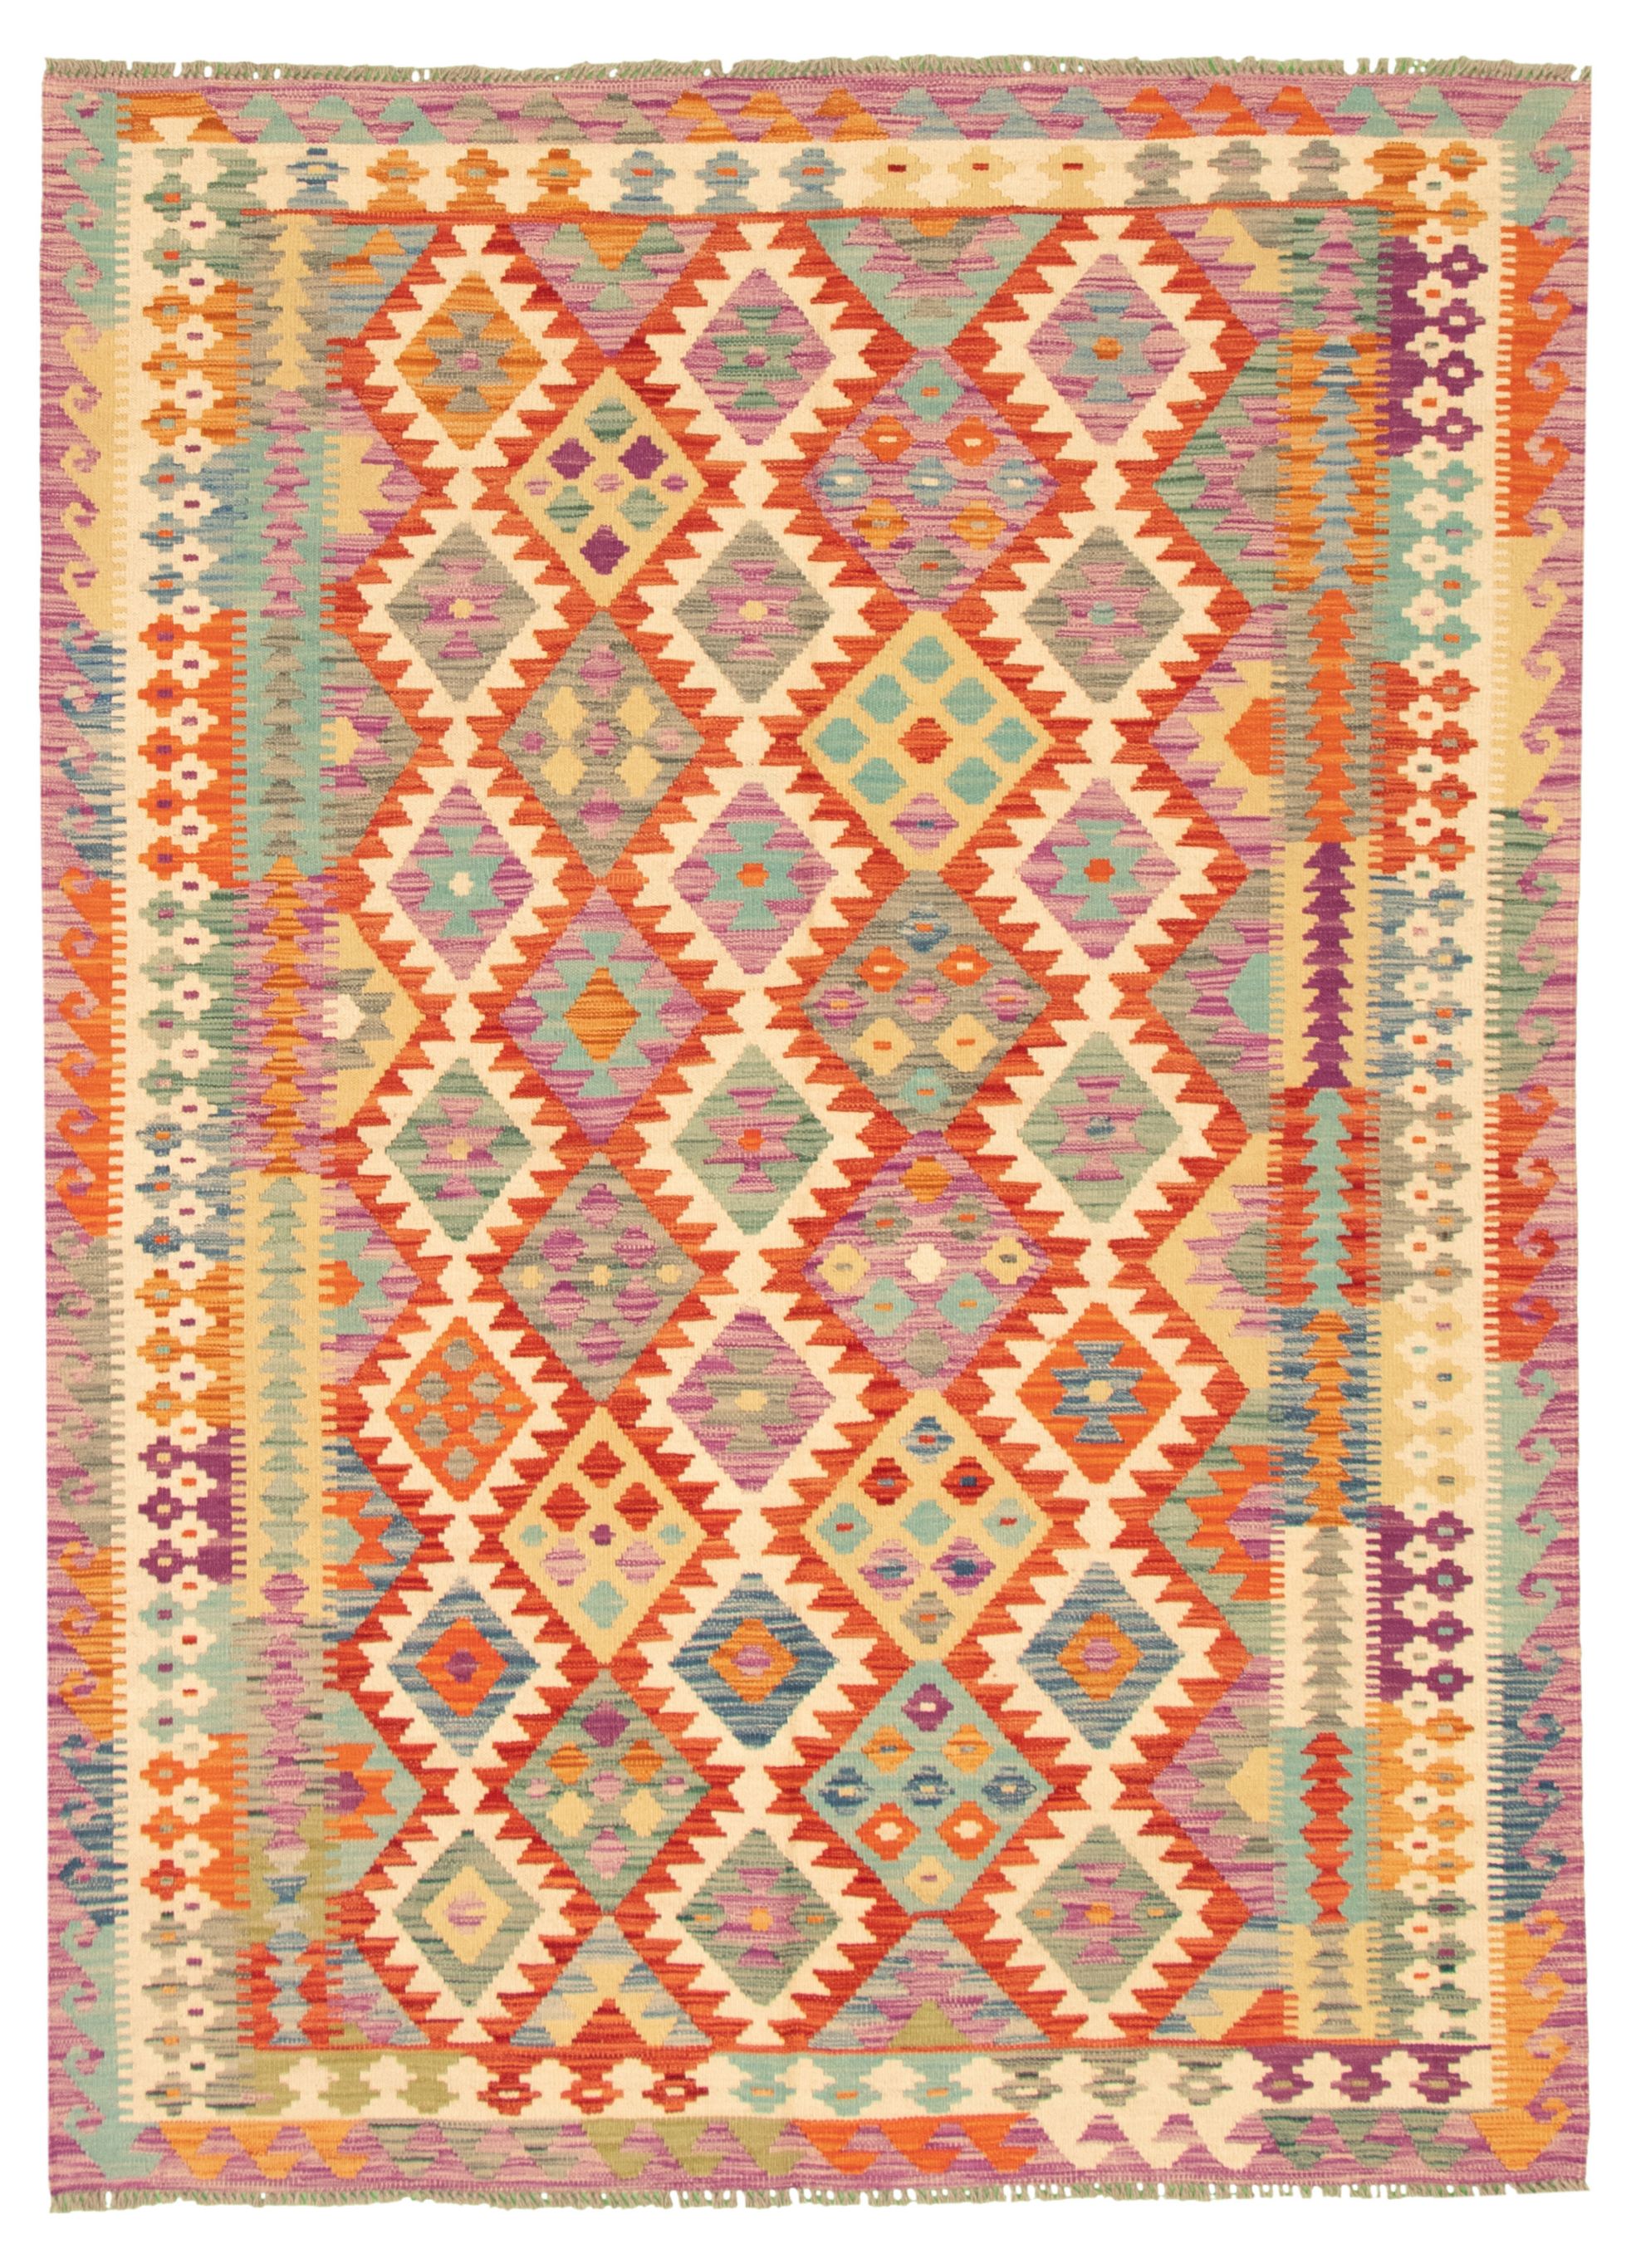 Hand woven Bold and Colorful  Ivory Wool Kilim 5'8" x 7'10" Size: 5'8" x 7'10"  